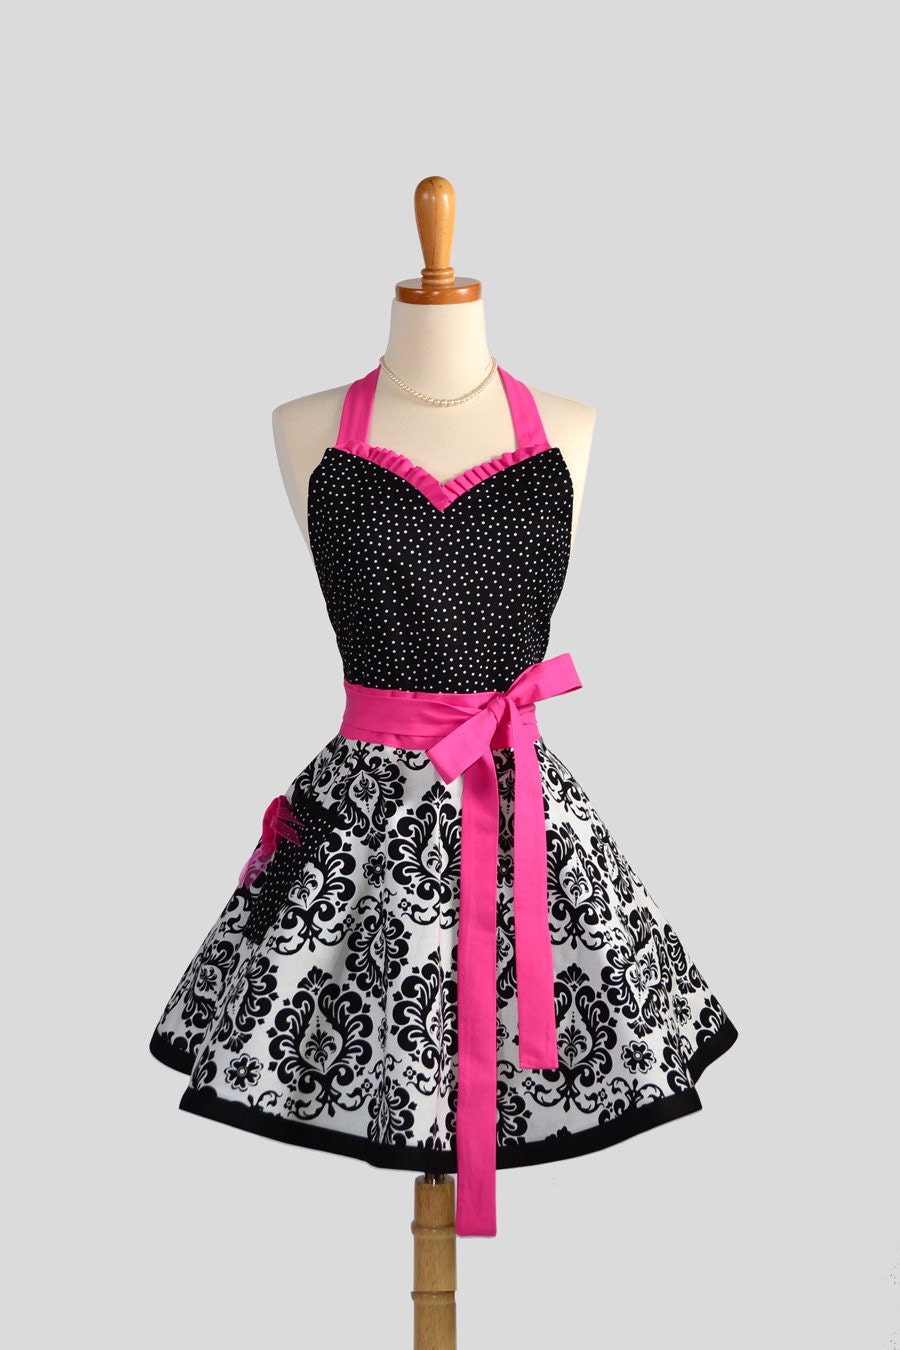 Sweetheart Retro Apron / Cute Womens Apron in Black and White Damask Black Dots and Hot Pink a Sexy Apron